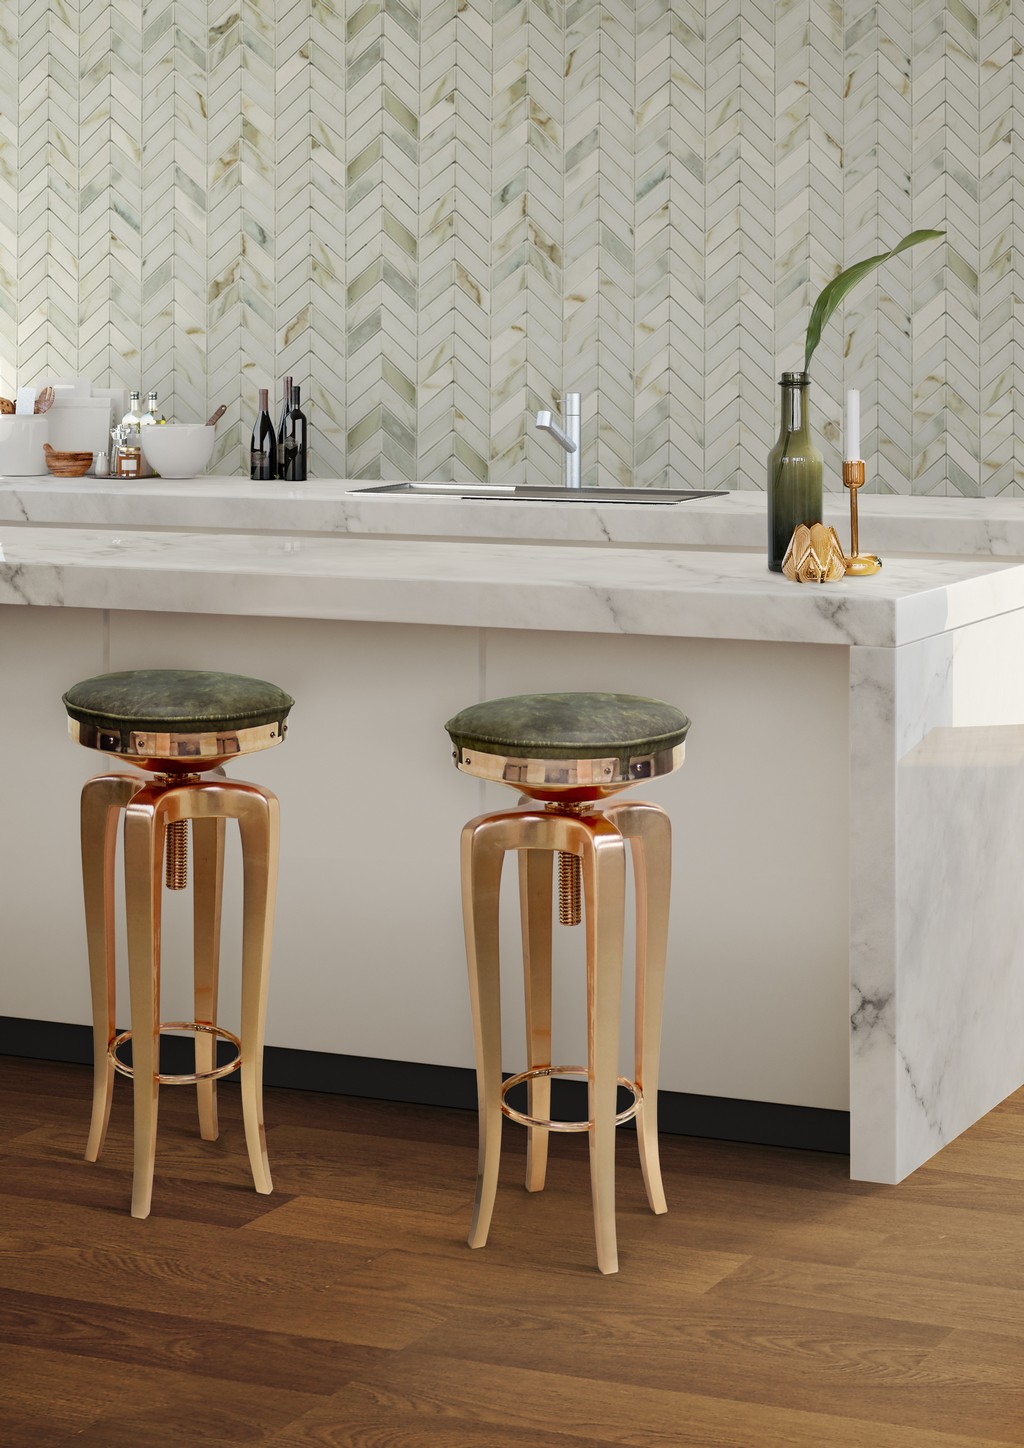 7 Kitchen Counter Stools For Small Places, Small Kitchen Counter Stools